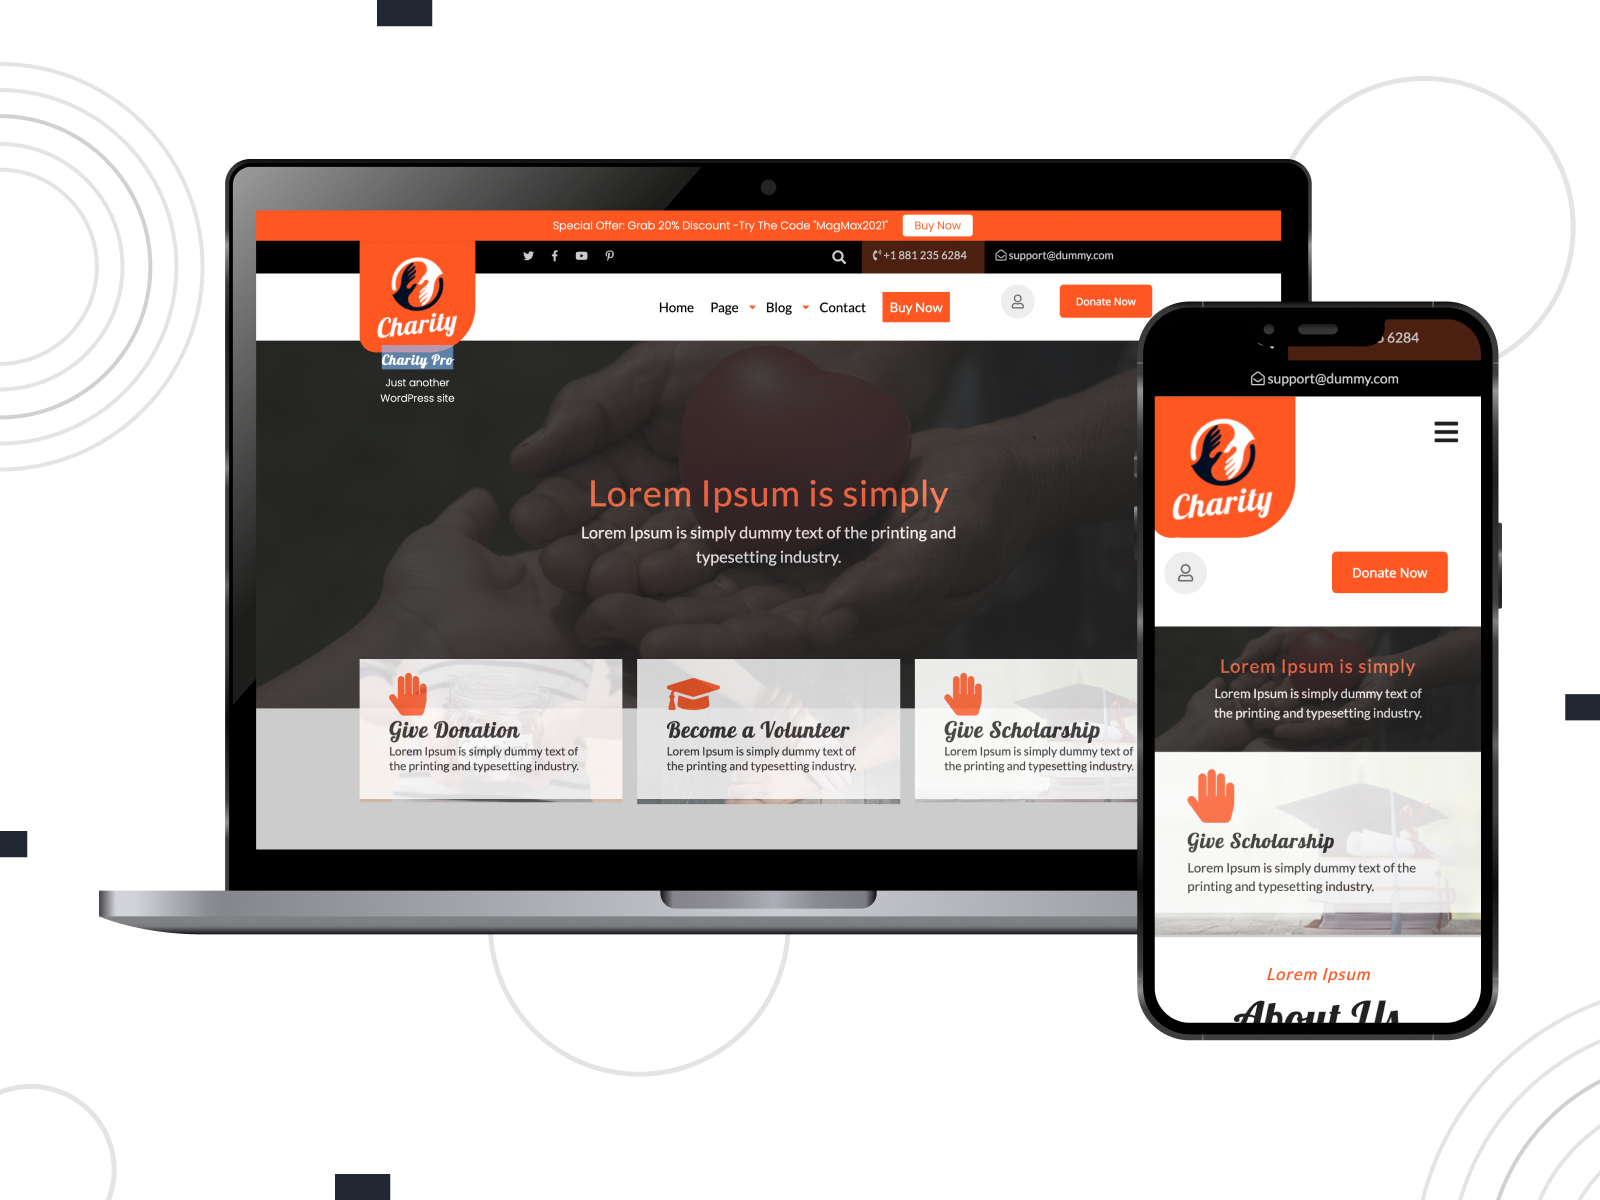 Picture of Charity Zone - free, innovative & responsive theme for crowdfunding with a full-width header in darkorange, white, and black color gradation.